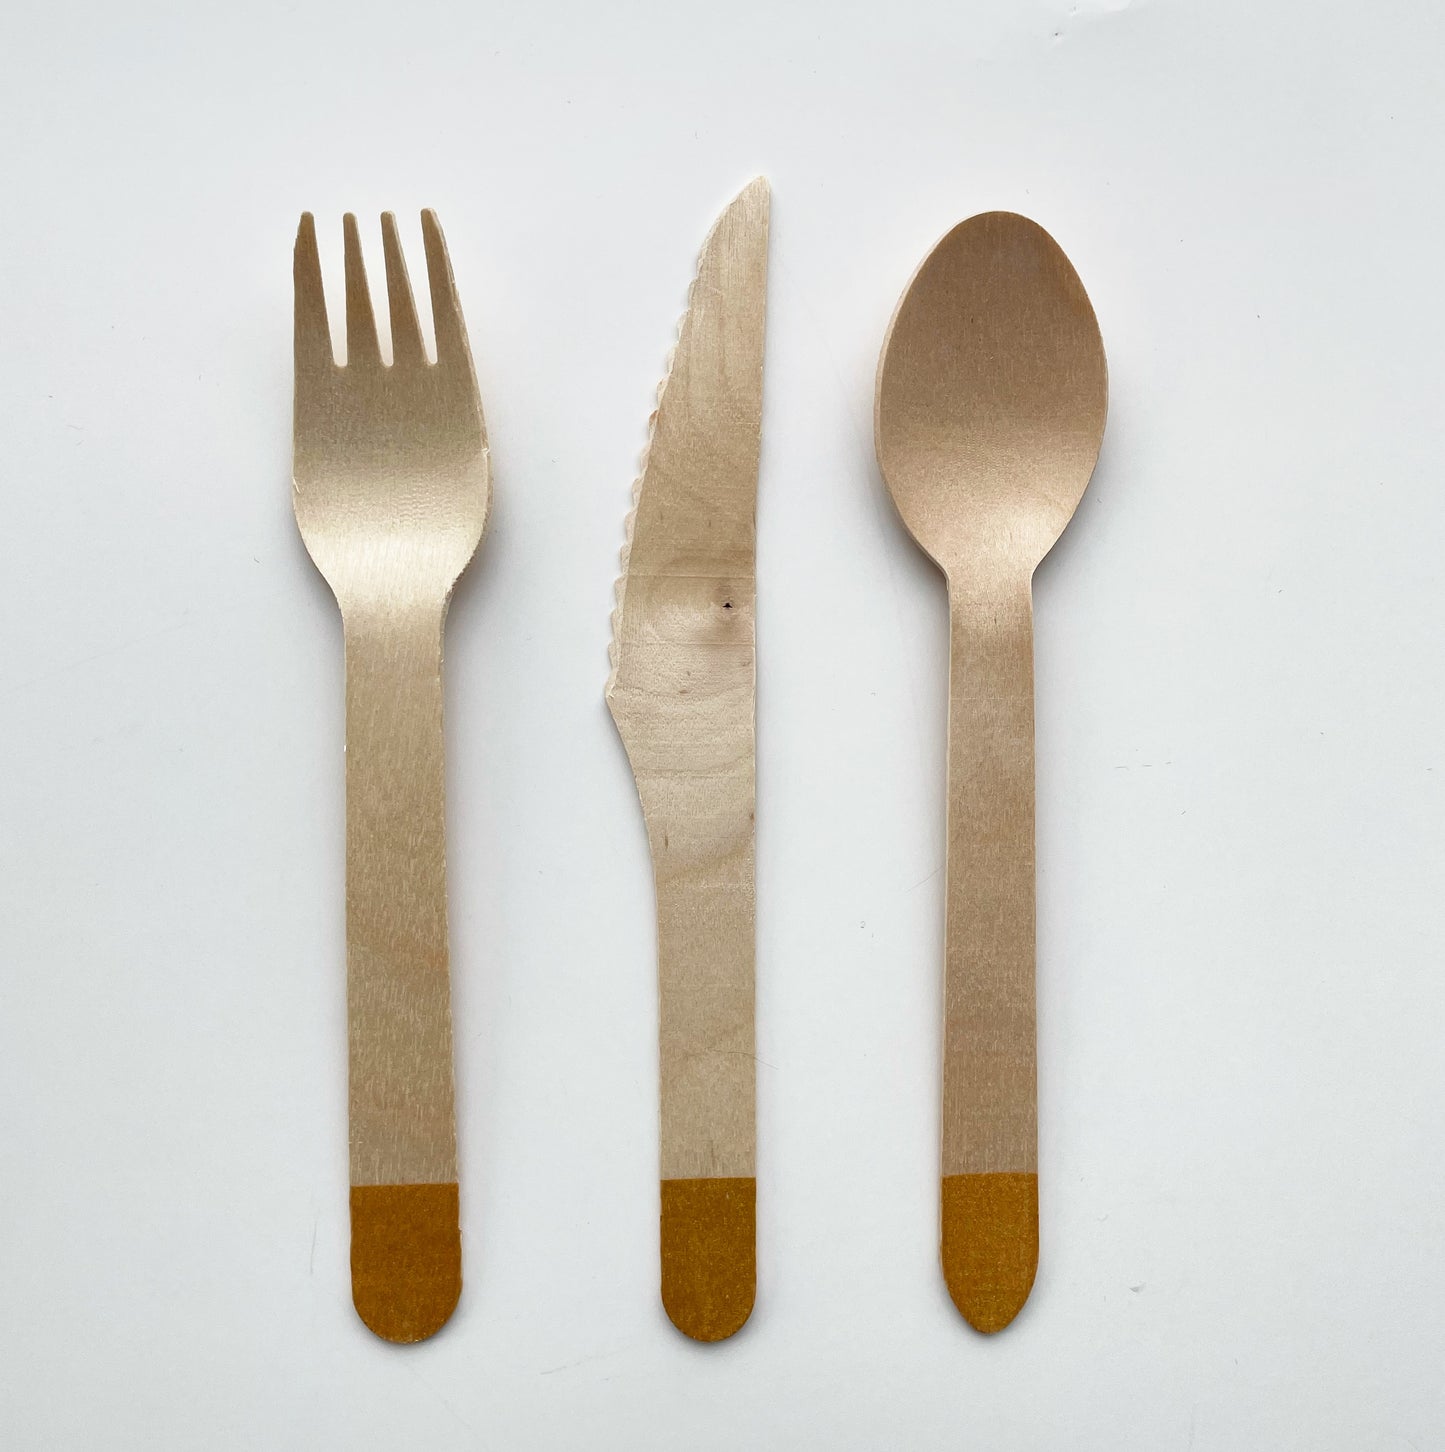 Gold dipped wooden utensils. This cutlery set includes knives, spoons and forks.